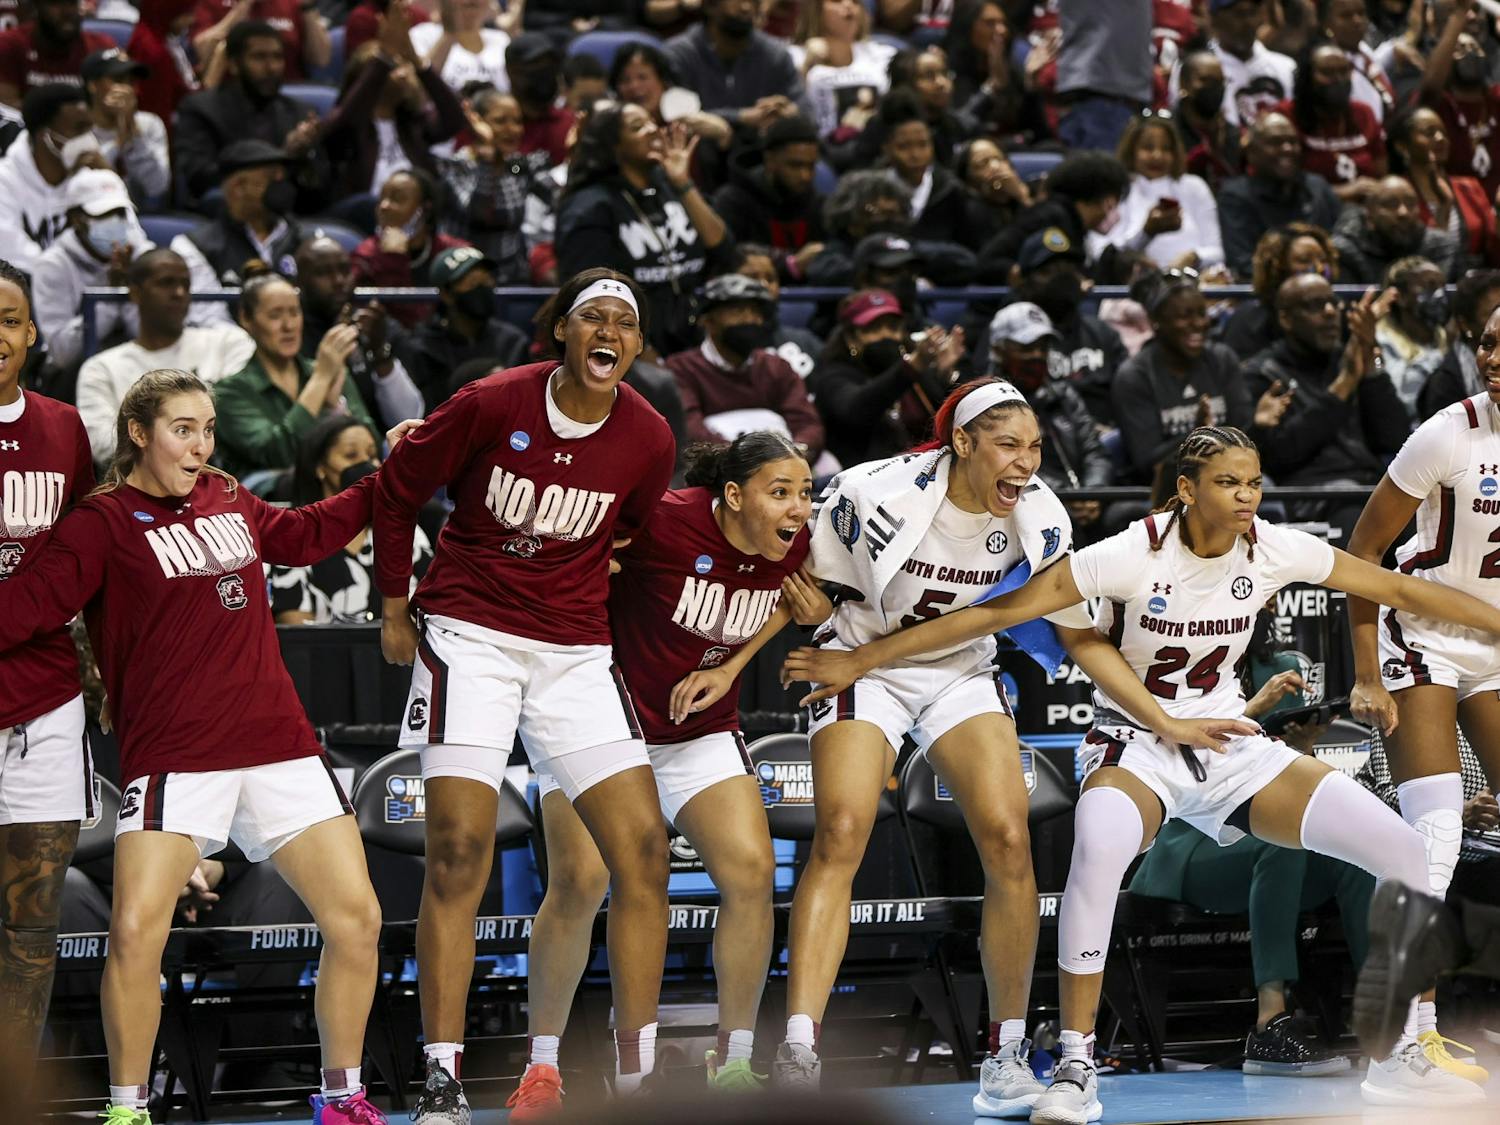 Gamecock's bench celebrating during the second quarter of South Carolina's 80-50 victory over Creighton in the Elite Eight on Sunday, March 27, 2022. The win propelled the team to the Final Four.&nbsp;